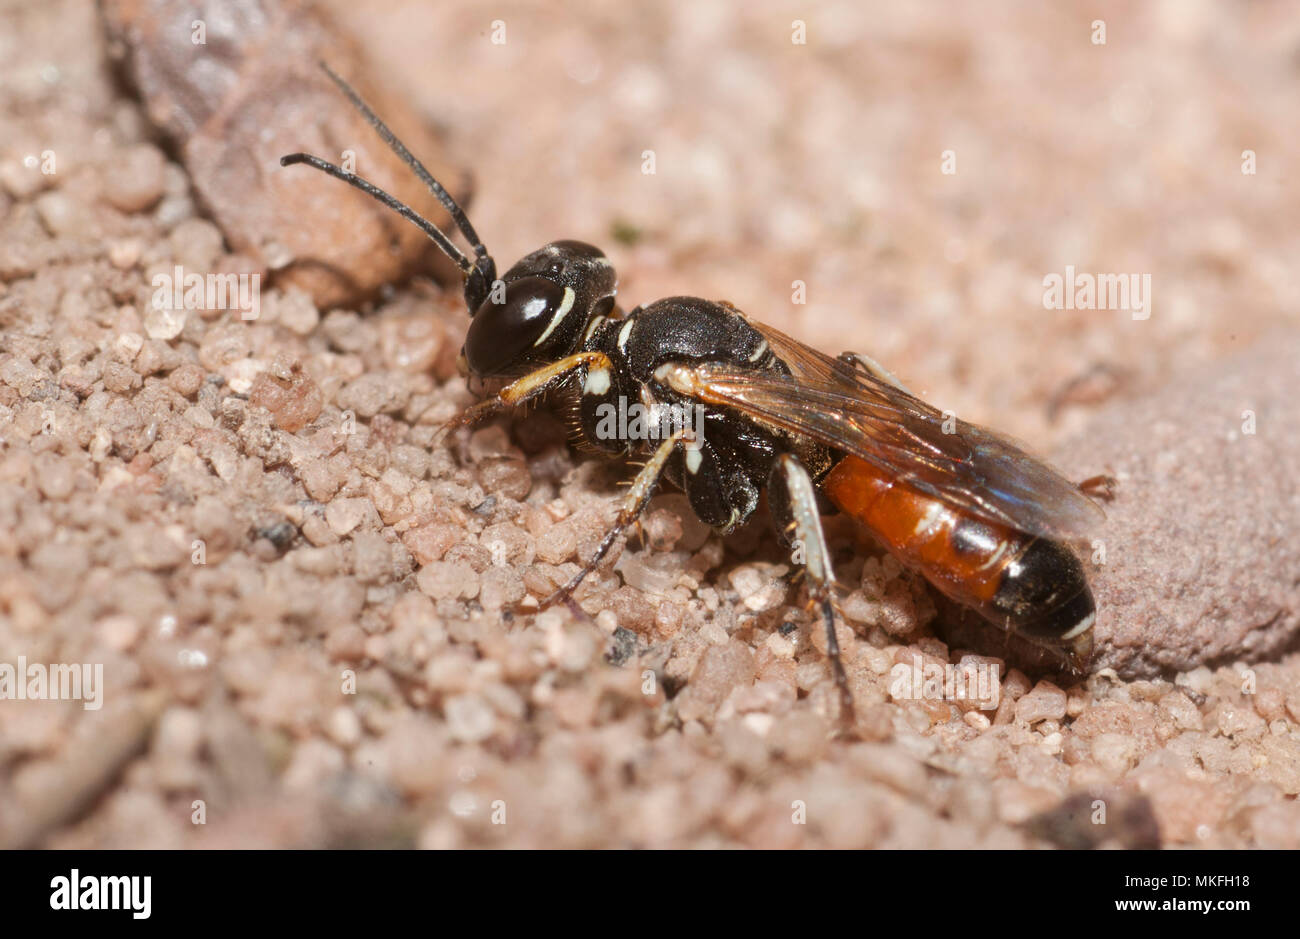 Digger wasp (Dinetus pictus) female, Regional Natural Park of Northern Vosges, France Stock Photo